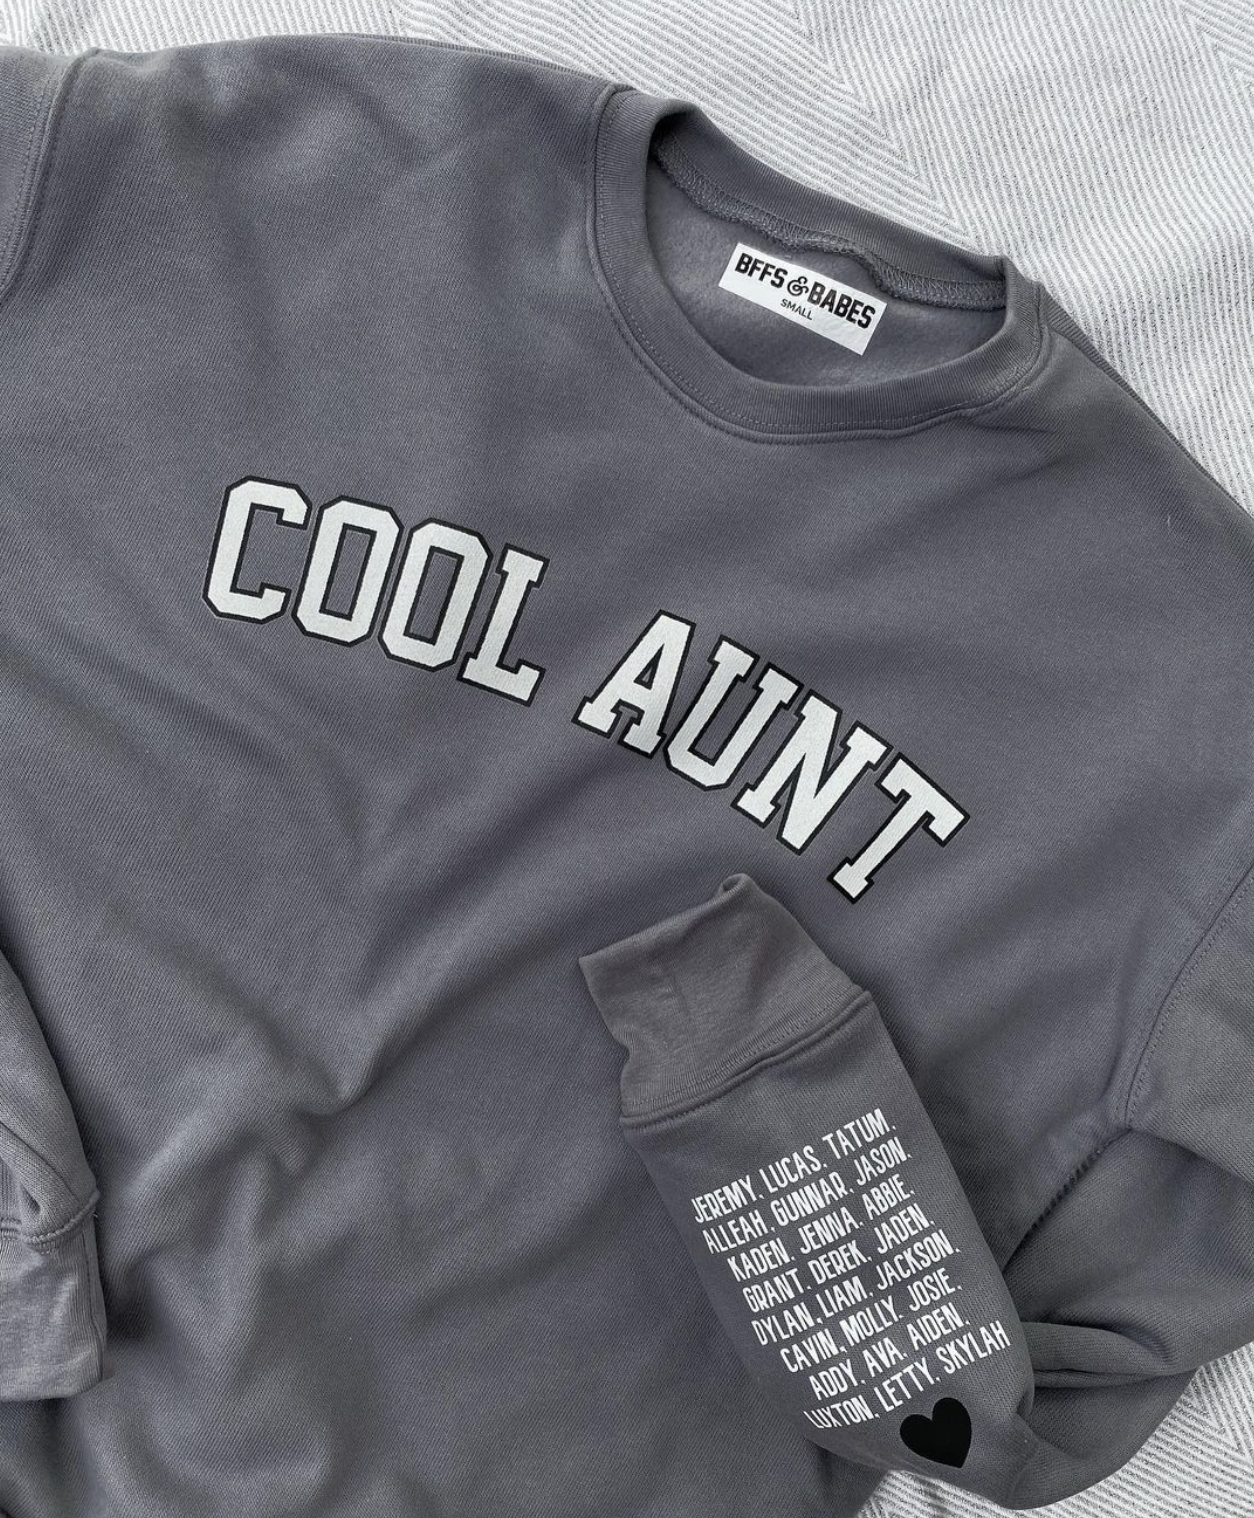 LOVE ON THE CUFF ♡ stormy cool aunt sweatshirt with personalized cuff